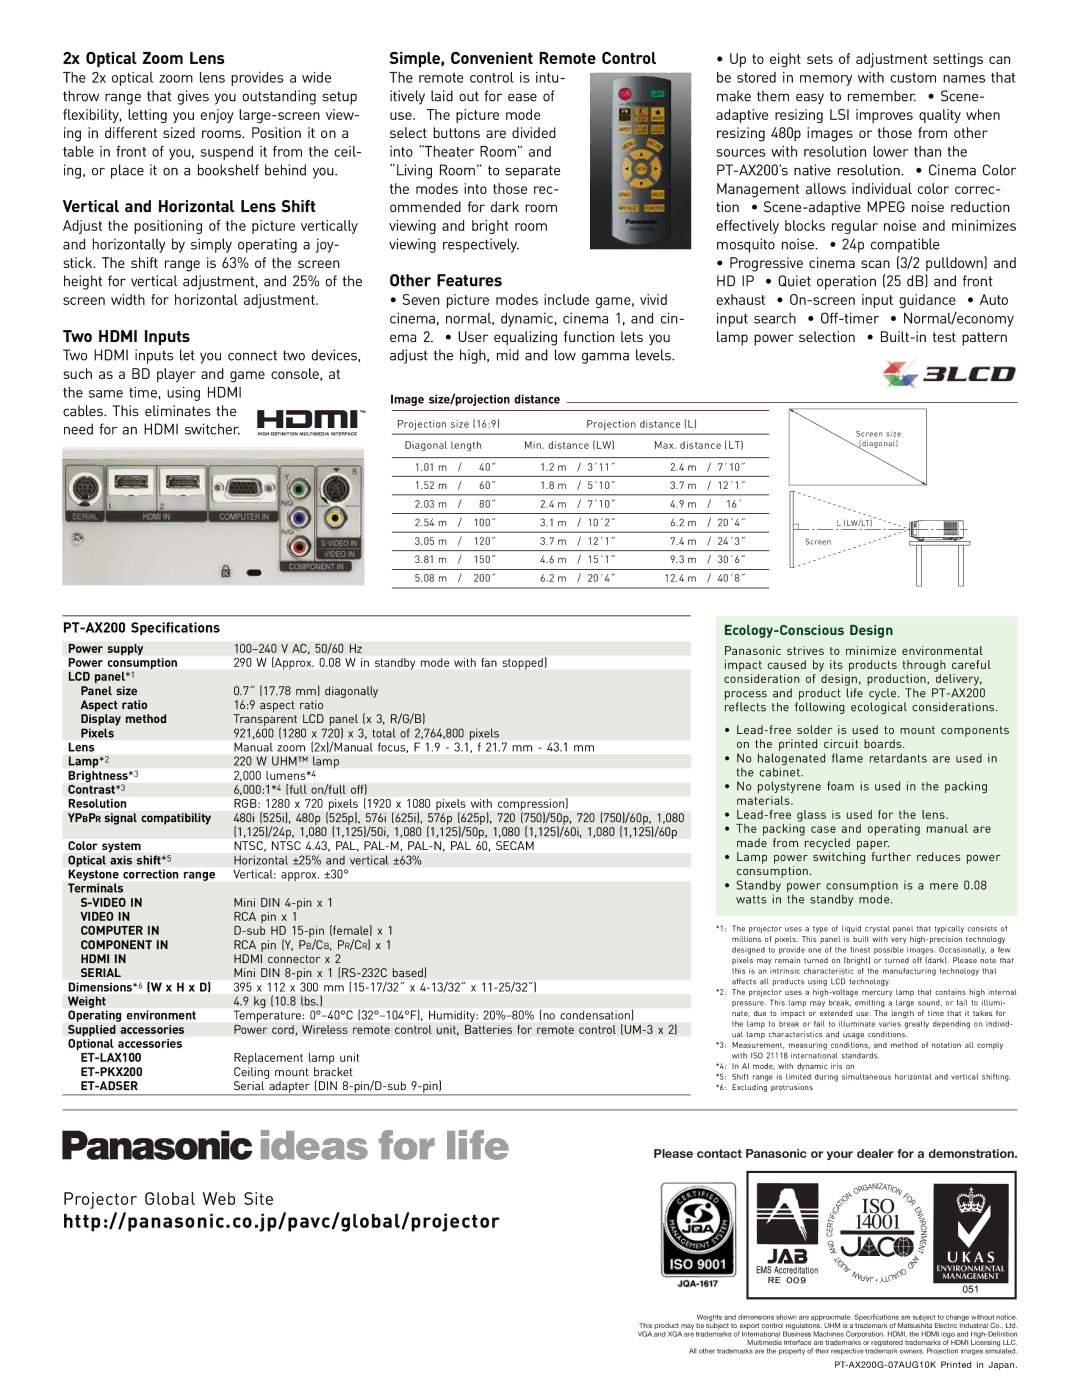 Panasonic PT-AX manual 2x Optical Zoom Lens, Vertical and Horizontal Lens Shift, Two Hdmi Inputs, Other Features 